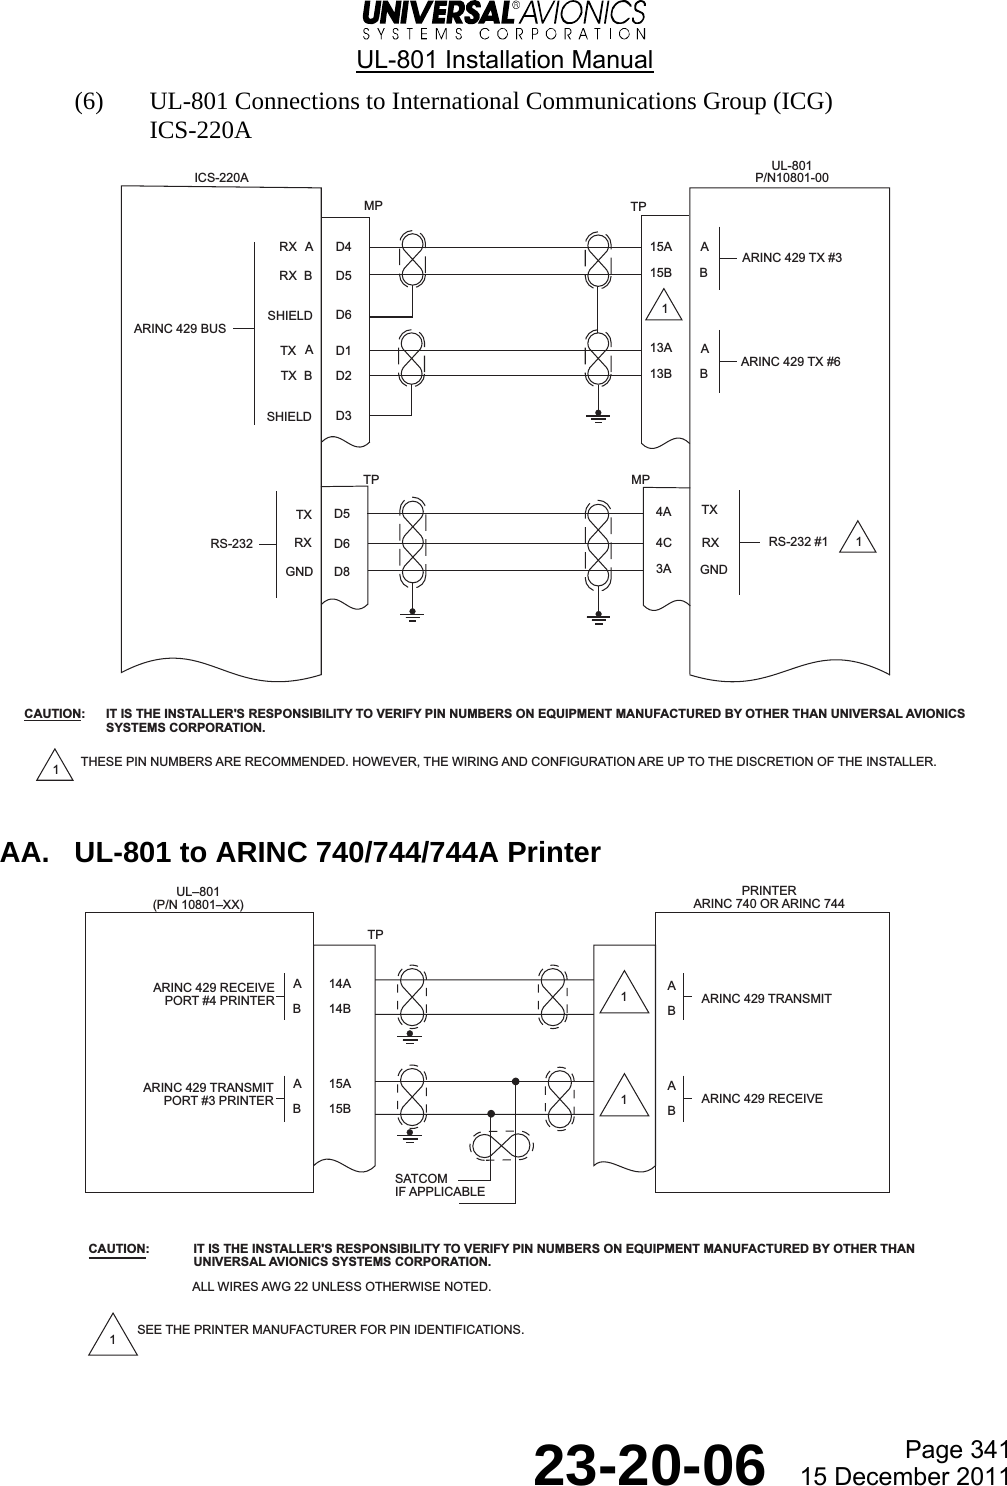  UL-801 Installation Manual  Page 341  23-20-06  15 December 2011 (6) UL-801 Connections to International Communications Group (ICG) ICS-220A   AA.  UL-801 to ARINC 740/744/744A Printer    ARINC 429 BUSICS-220AMP TPTPD6UL-801P/N10801-00RX D4MP15A15B13ARX D5D2TXD1TX13BD6SHIELDD3SHIELD1AD8D514C4A3A1THESE PIN NUMBERS ARE RECOMMENDED. HOWEVER, THE WIRING AND CONFIGURATION ARE UP TO THE DISCRETION OF THE INSTALLER.CAUTION:  IT IS THE INSTALLER&apos;S RESPONSIBILITY TO VERIFY PIN NUMBERS ON EQUIPMENT MANUFACTURED BY OTHER THAN UNIVERSAL AVIONICS SYSTEMS CORPORATION.ABBARINC 429 TX #3ARINC 429 TX #6RS-232 #1TXRXGNDGNDRXTXRS-232ABABCAUTION: IT IS THE INSTALLER&apos;S RESPONSIBILITY TO VERIFY PIN NUMBERS ON EQUIPMENT MANUFACTURED BY OTHER THANUNIVERSAL AVIONICS SYSTEMS CORPORATION.                ALL WIRES AWG 22 UNLESS OTHERWISE NOTED.A        14AB        14BA        15AB        15BARINC 429 RECEIVEPORT #4 PRINTERA          ARINC 429 TRANSMITBA          ARINC 429 RECEIVEBTPPRINTERARINC 740 OR ARINC 744UL801(P/N 10801XX)ARINC 429 TRANSMITPORT #3 PRINTERSATCOMIF APPLICABLE111SEE THE PRINTER MANUFACTURER FOR PIN IDENTIFICATIONS.